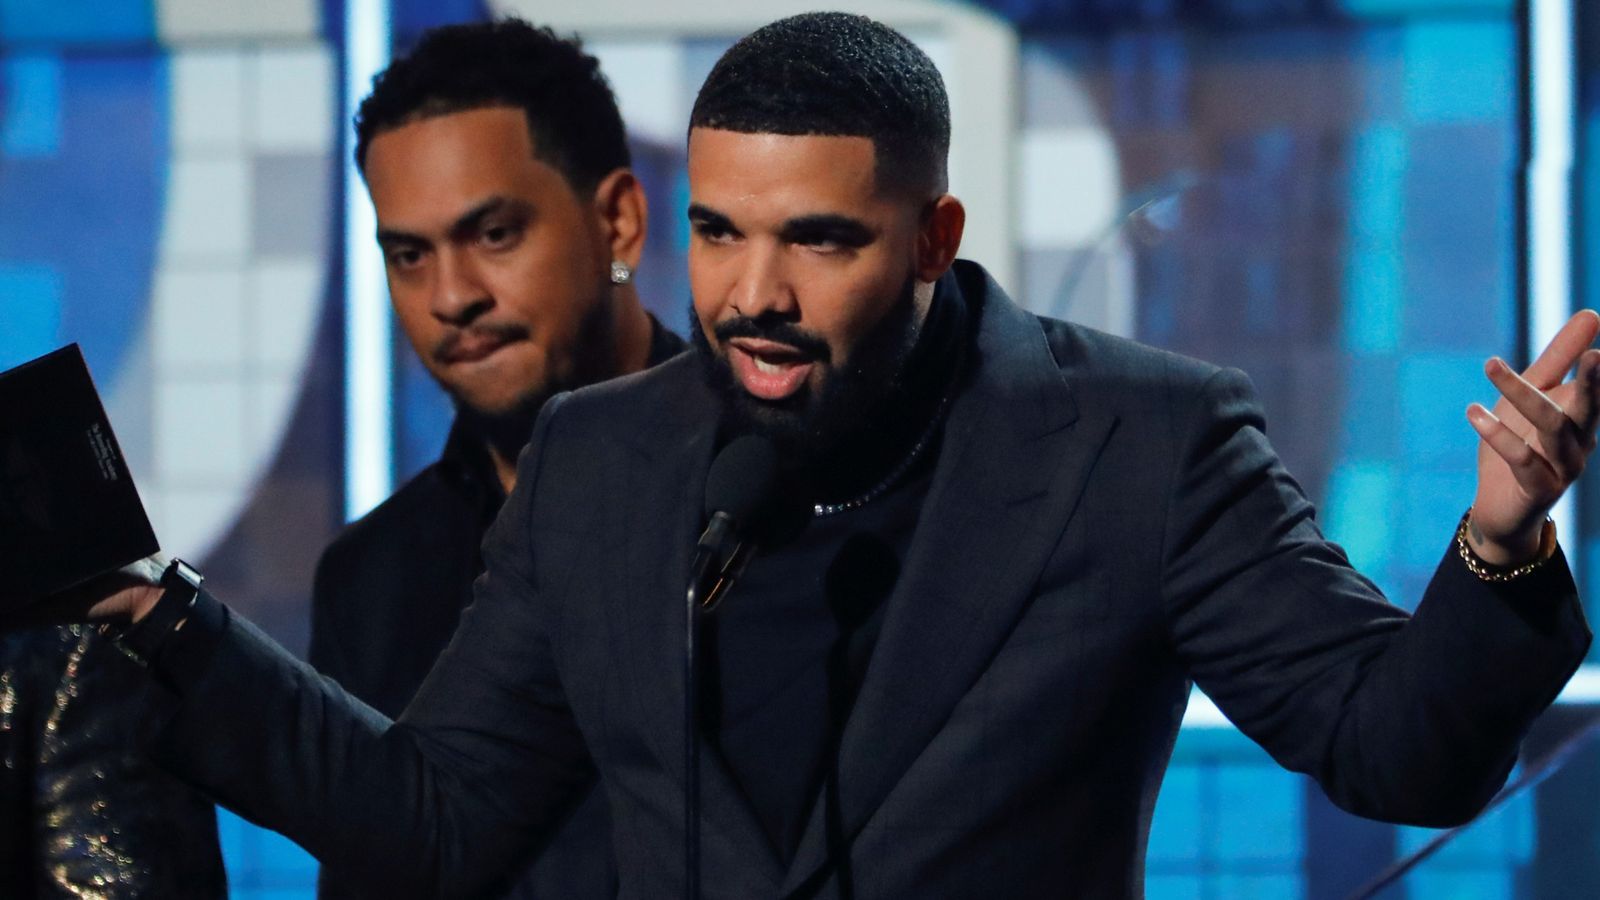 Drake Rapper and singer withdraws nominations for 2022 Grammy Awards